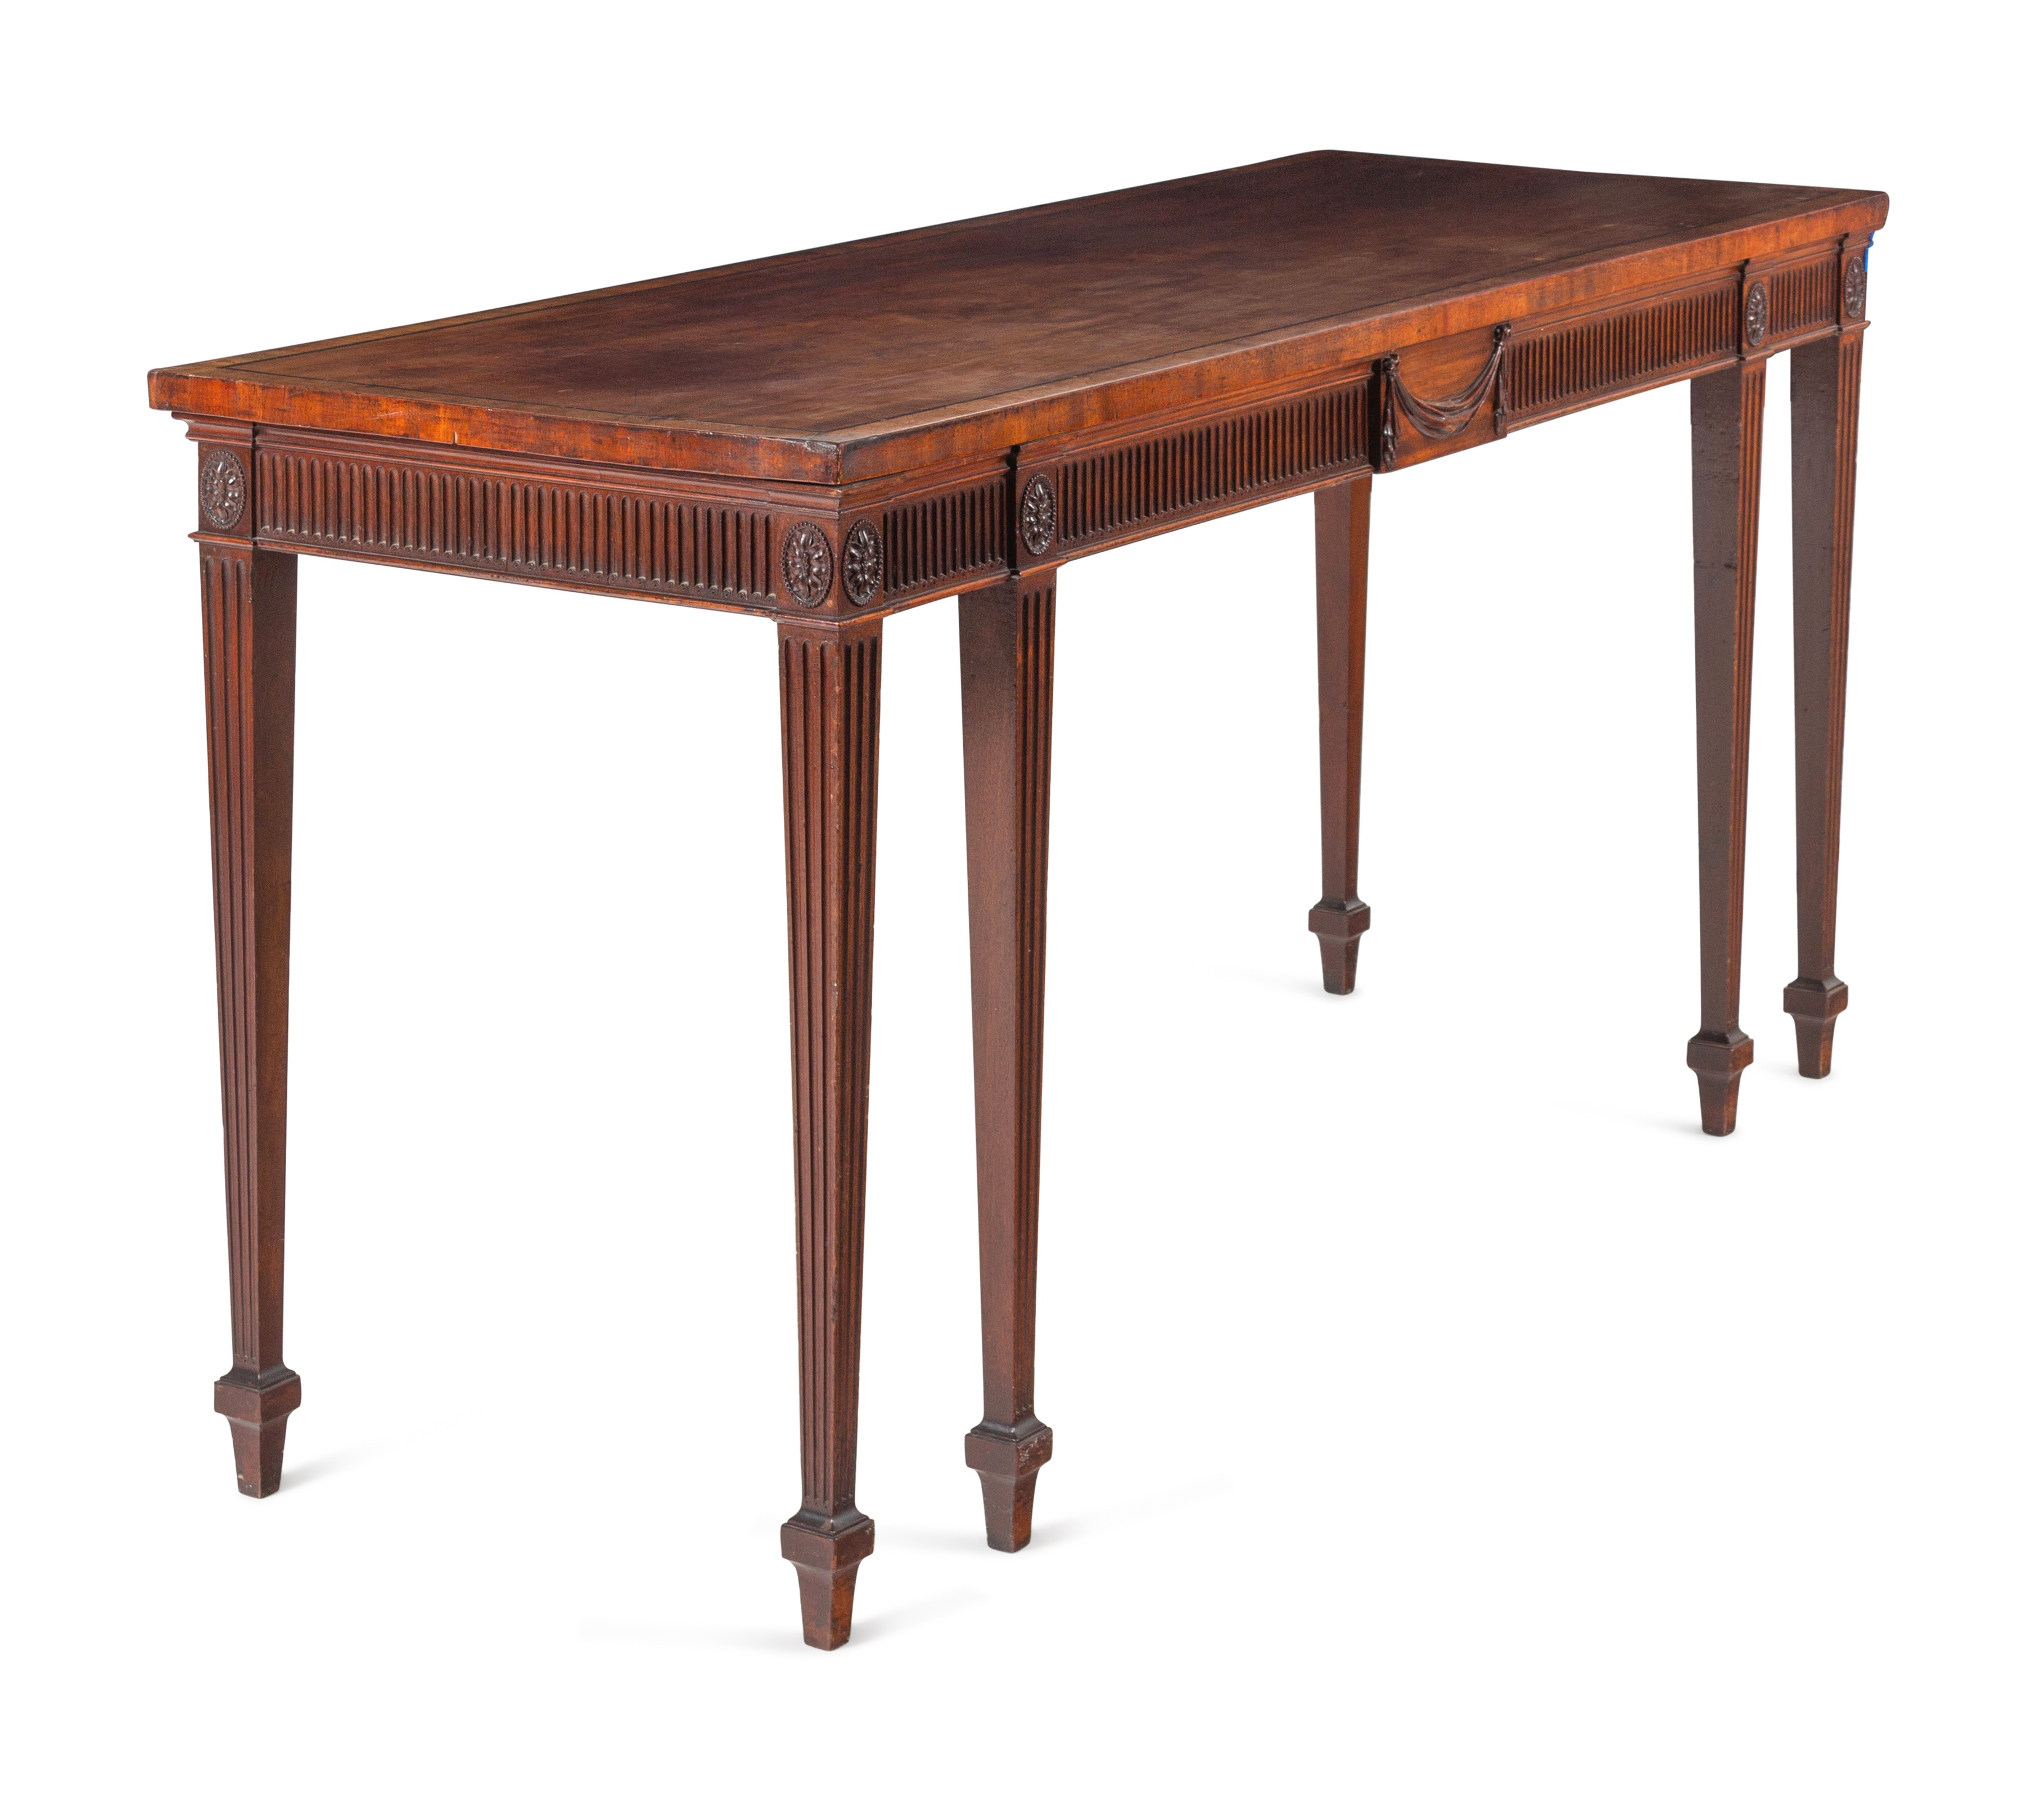 A George III Mahogany and Ebony-Inlaid Serving Table in the Manner of Thomas Chippendale - Image 3 of 8